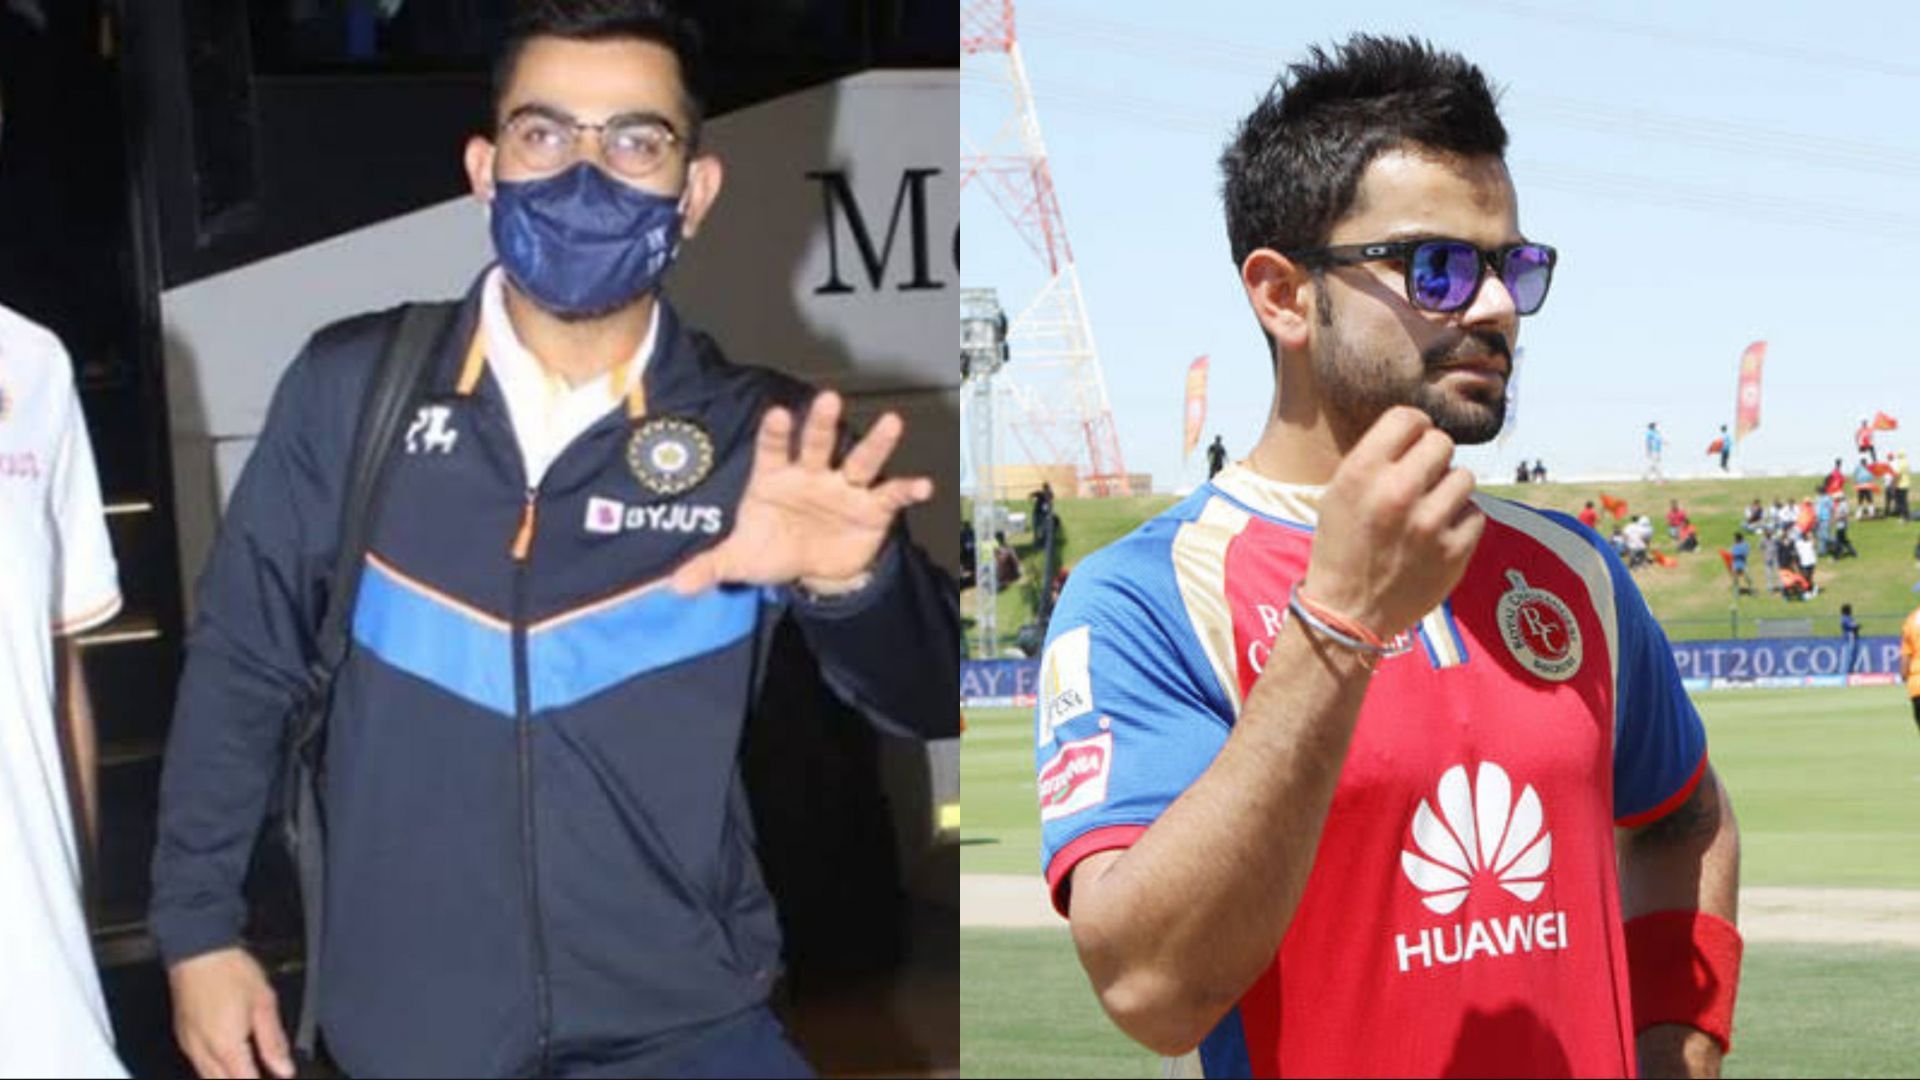 Virat Kohli is one of the most popular celebrities in the world (Image: Twitter)